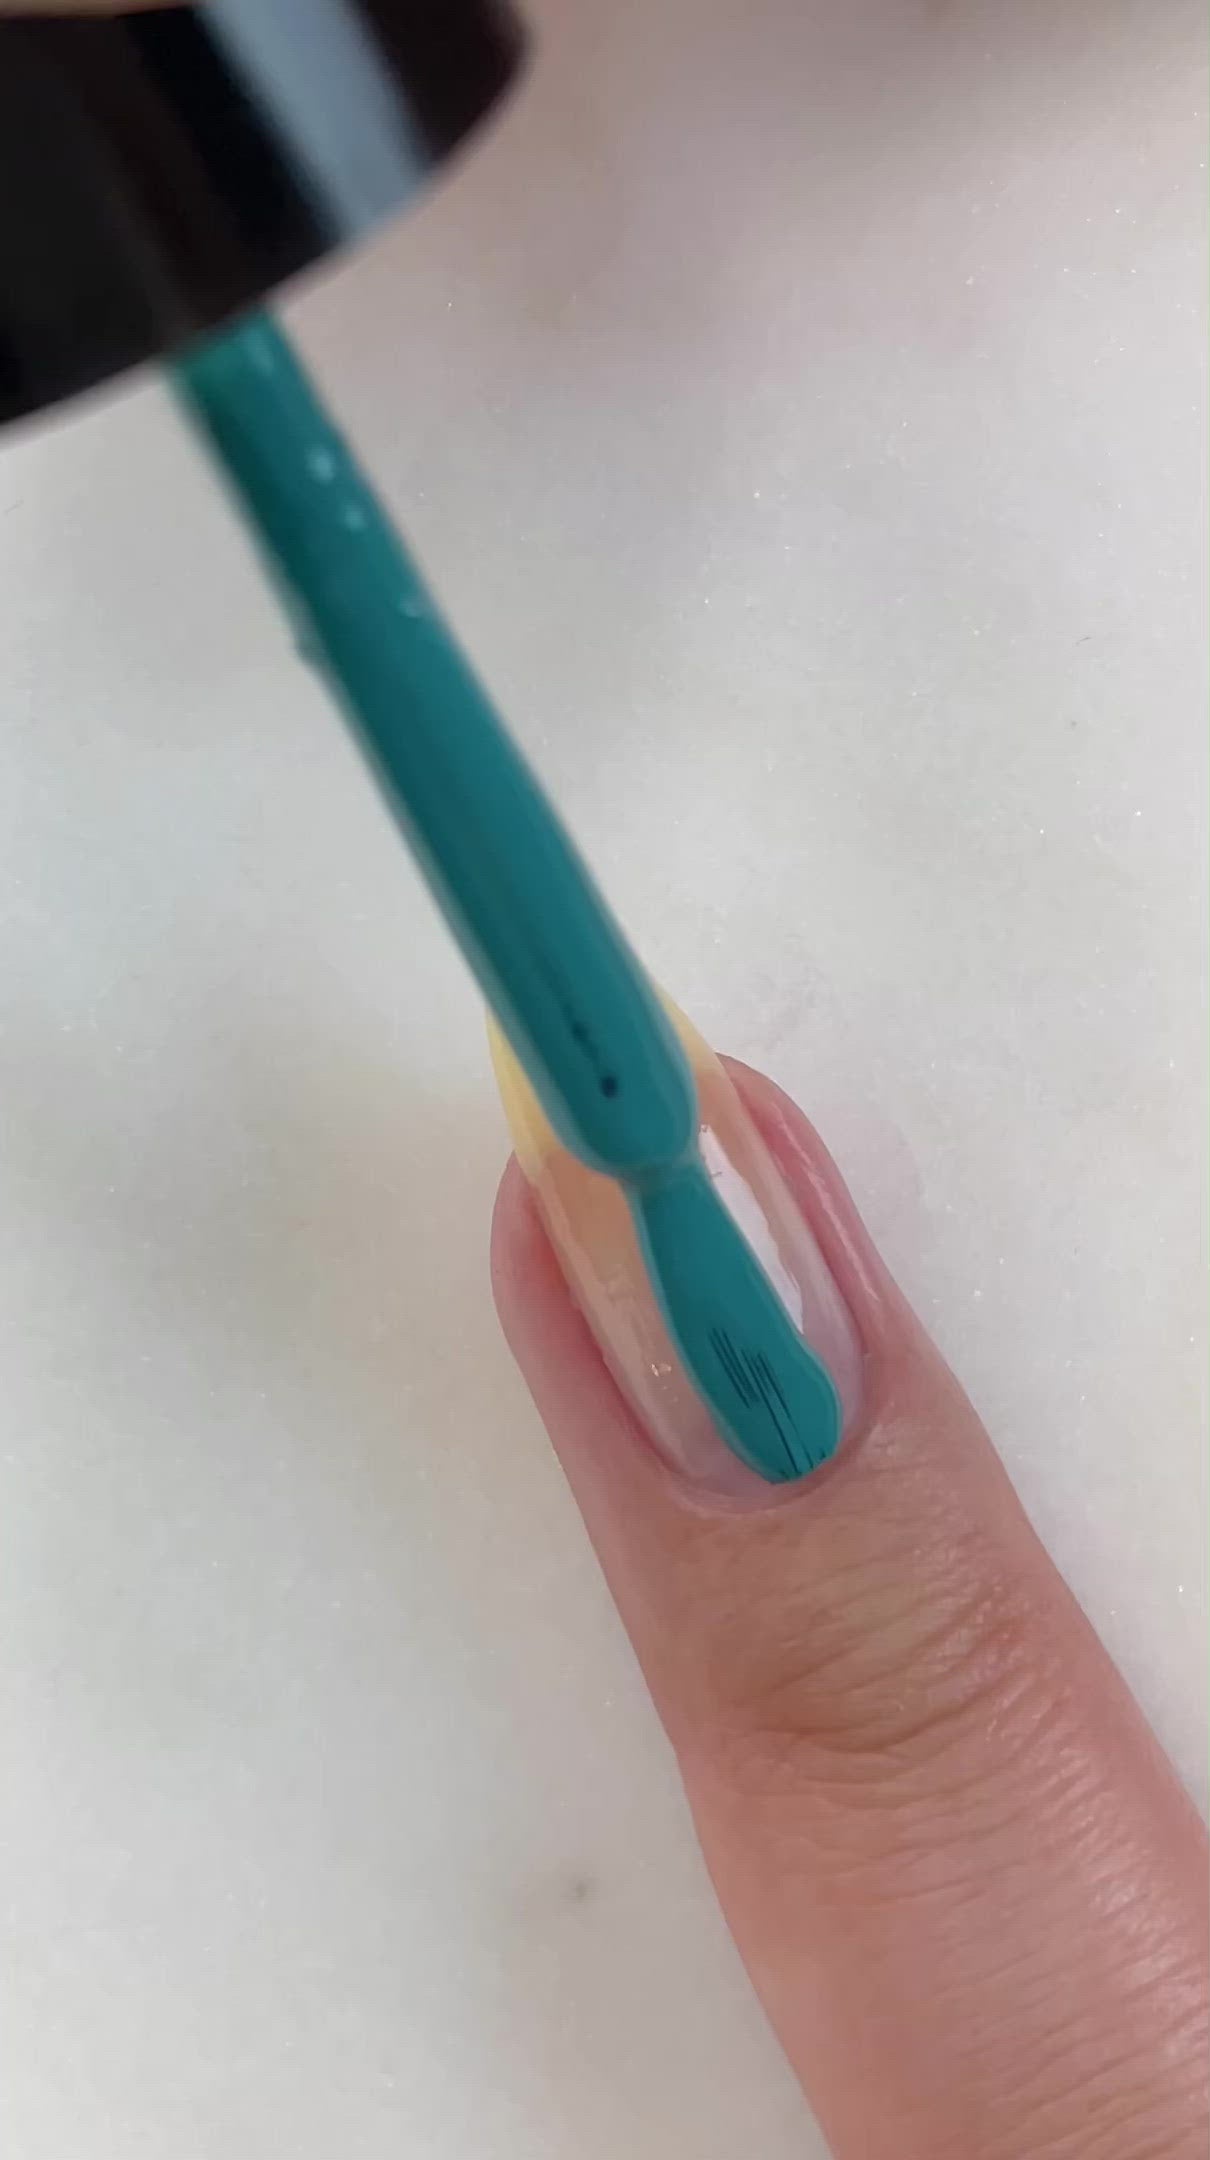 video of fair skin hand model painting nails with turquoise nail lacquer